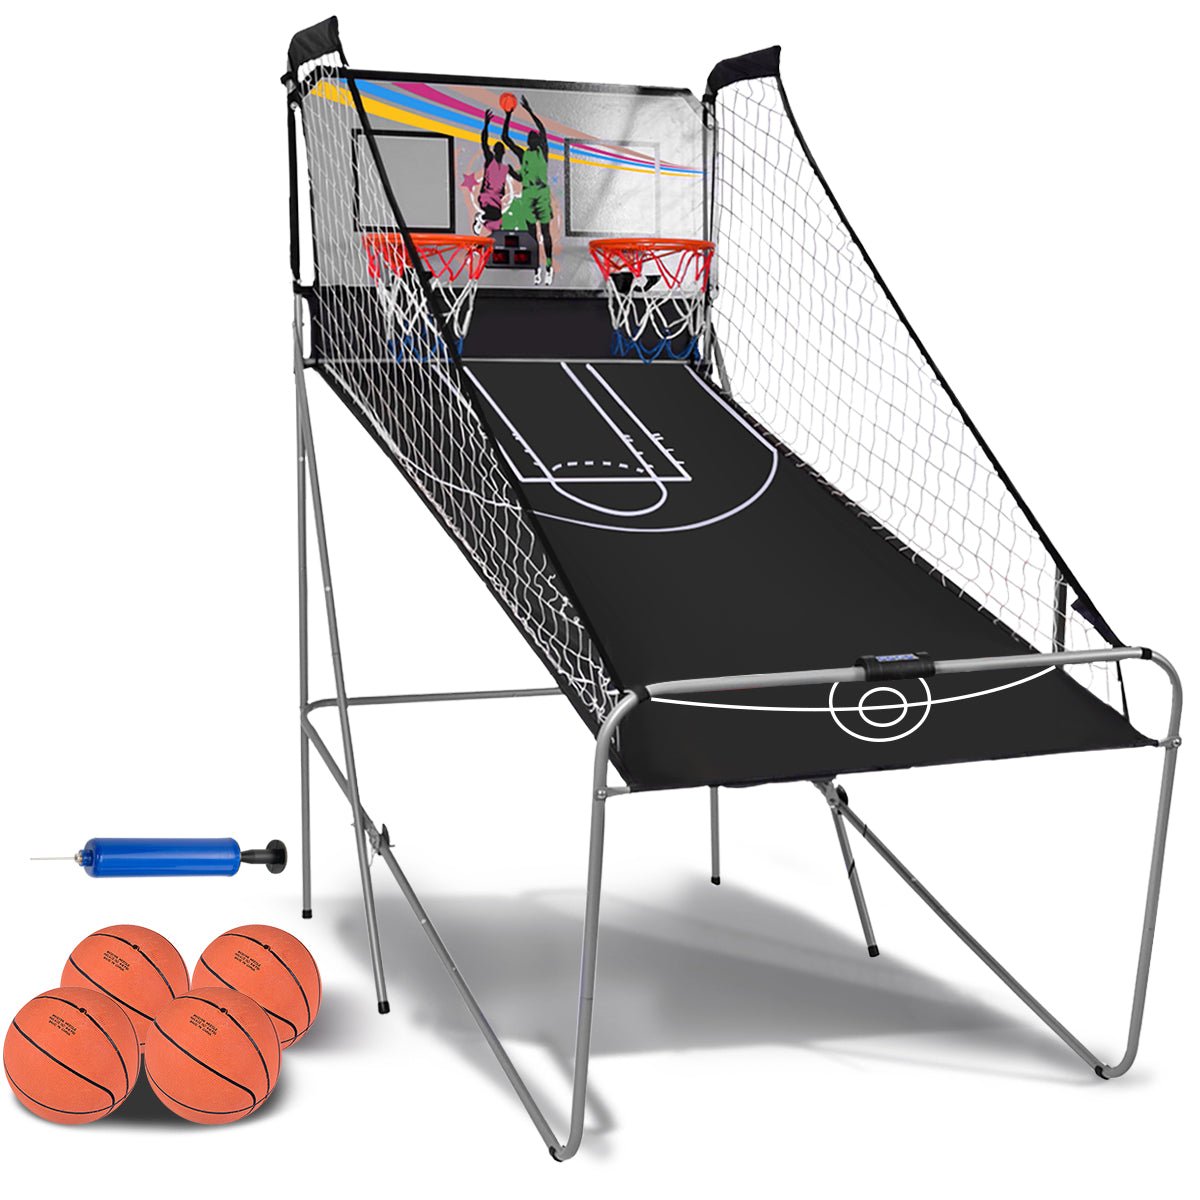 Indoor Electronic Basketball Hoop Arcade: 8-in-1 Game for Active Fun